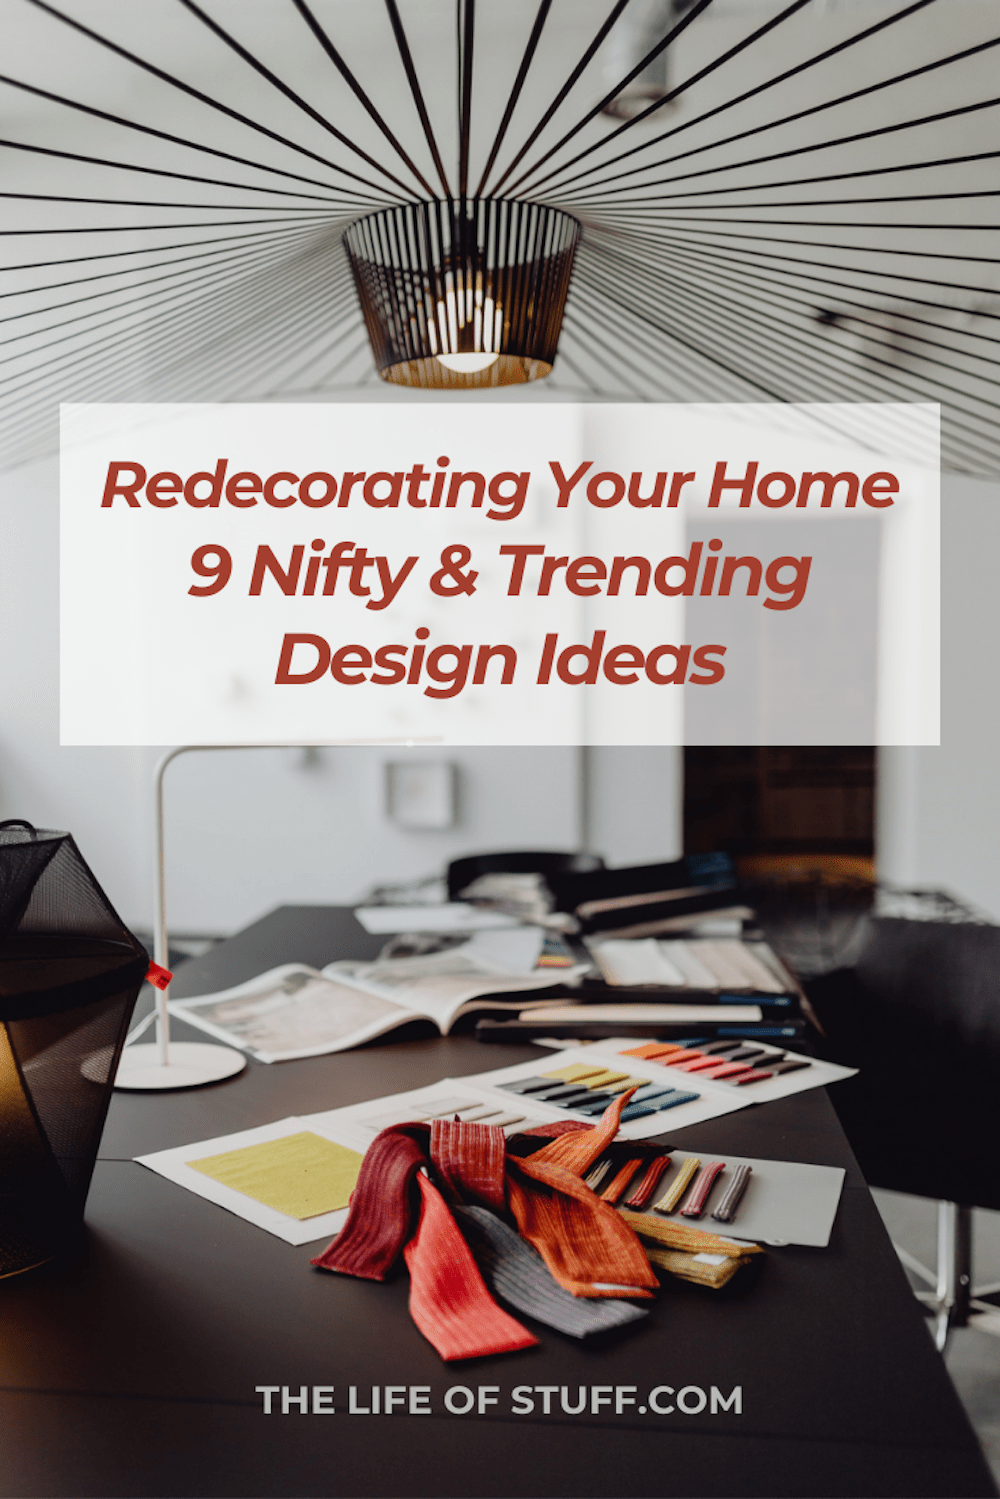 Redecorating Your Home - 9 Nifty & Trending Design Ideas - The Life of Stuff